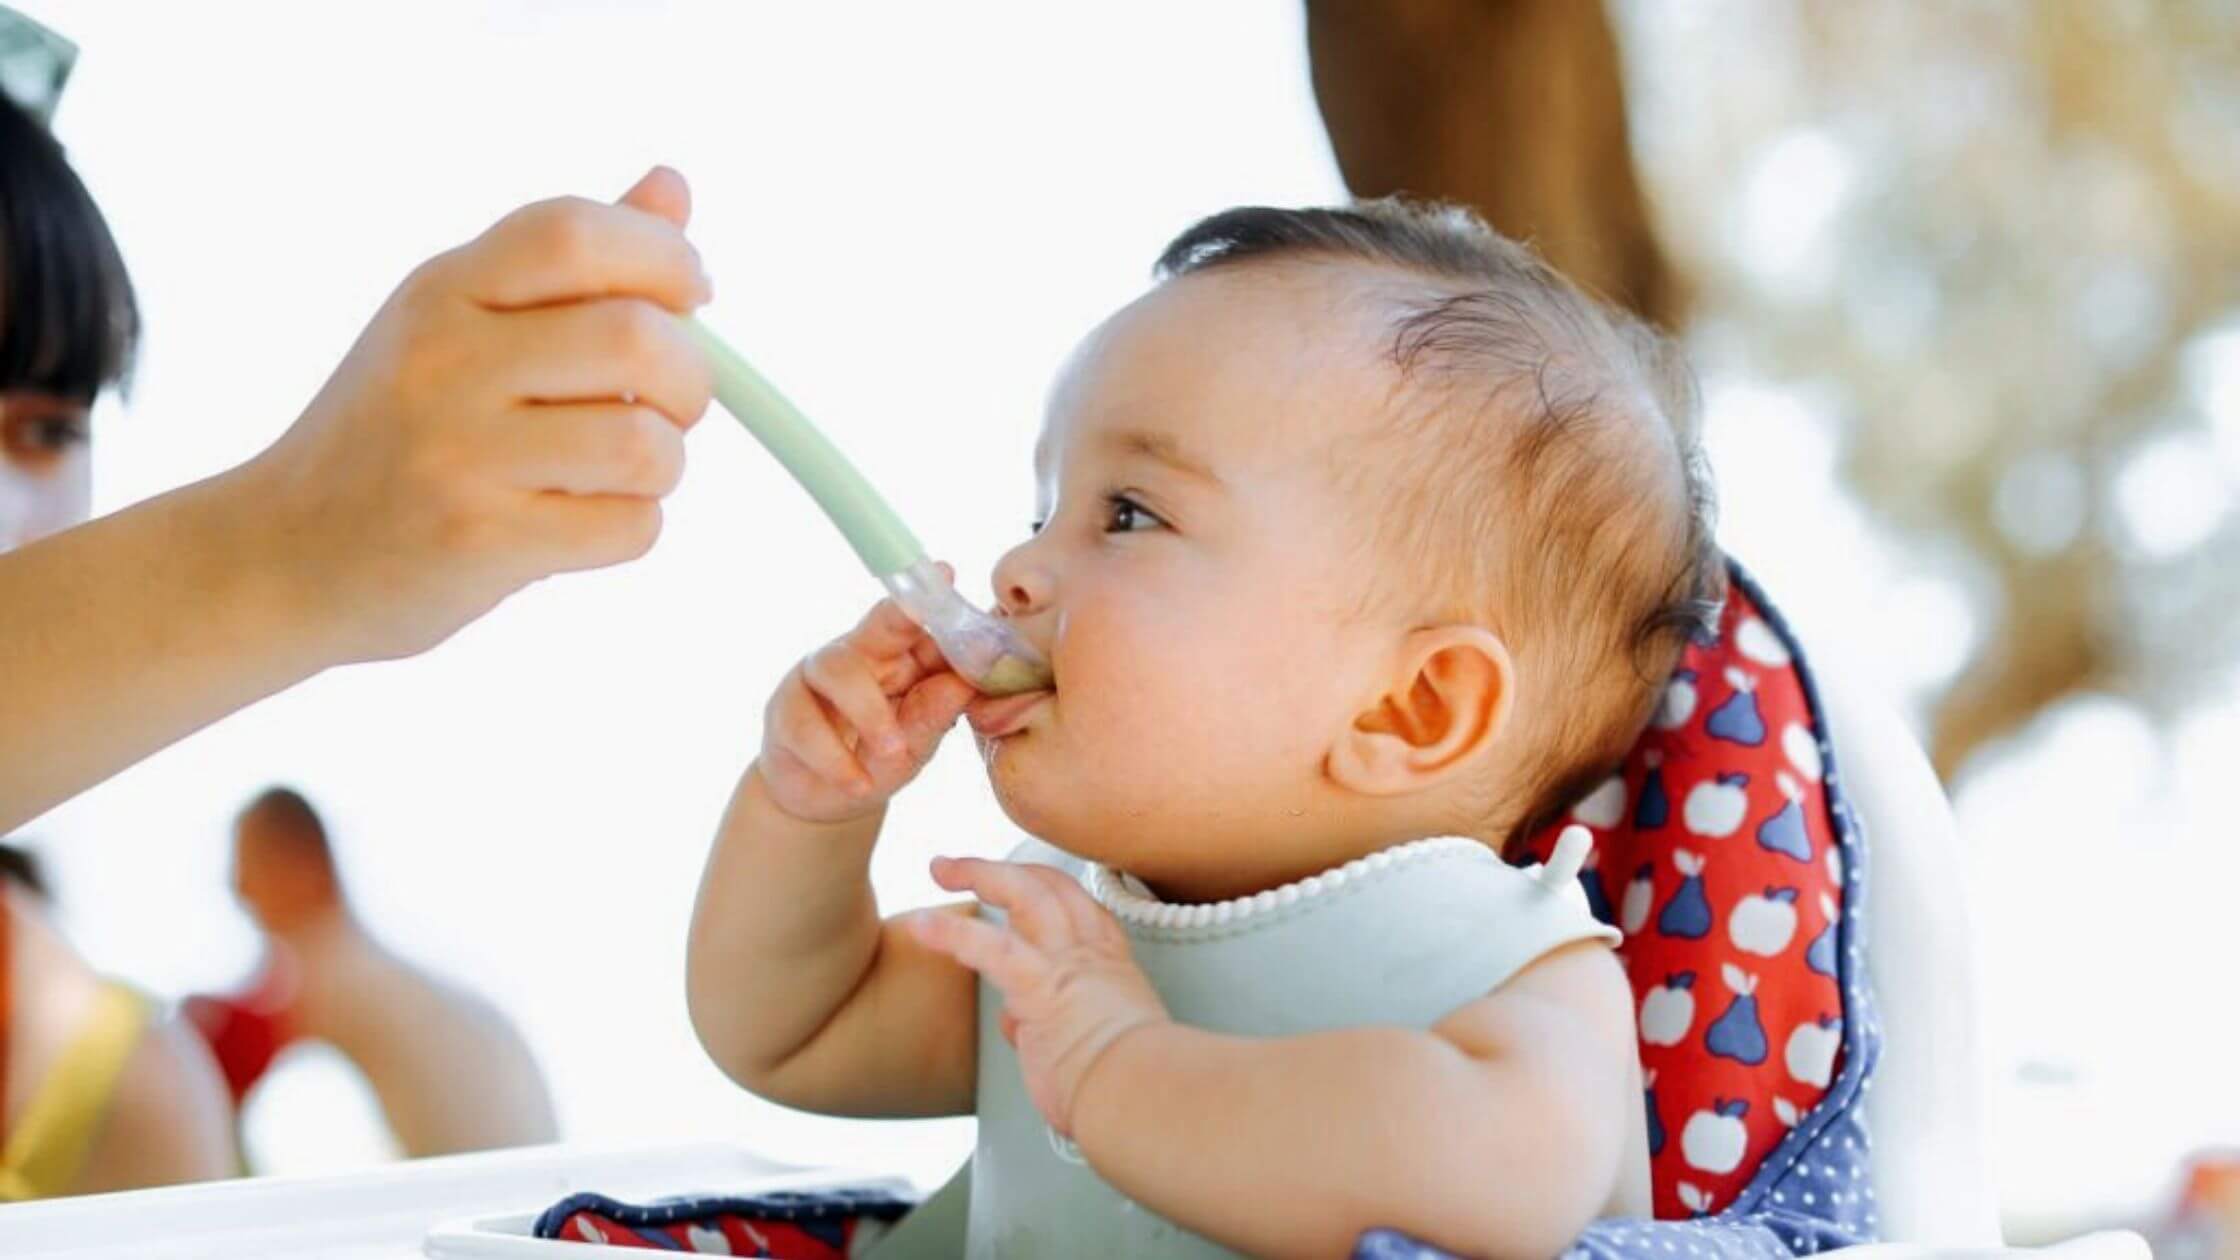 A Homemade Baby Food Contains As Many Toxic Metals As A Store-Bought One How